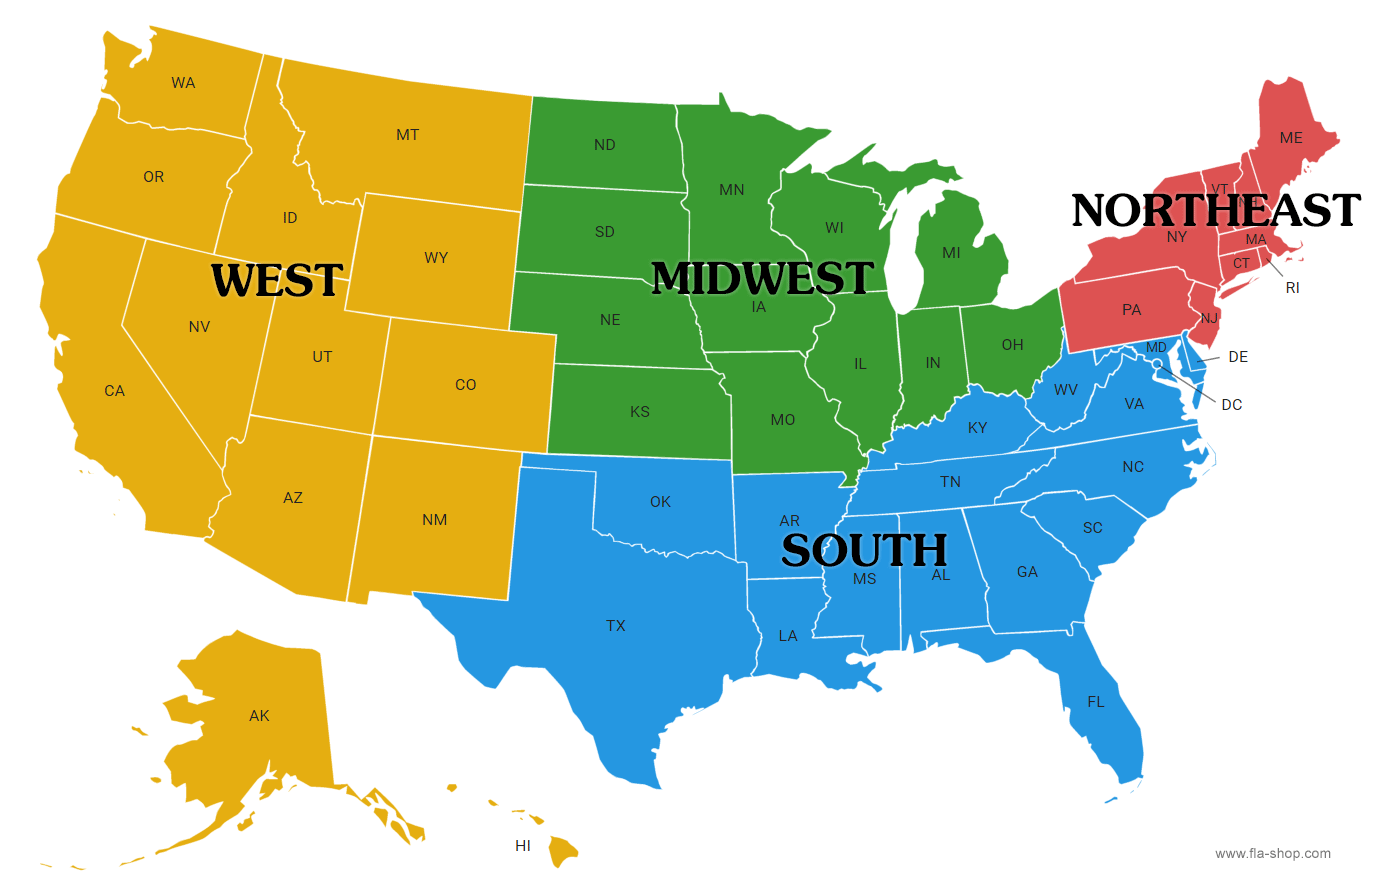 Map of the U.S. with 4 regions